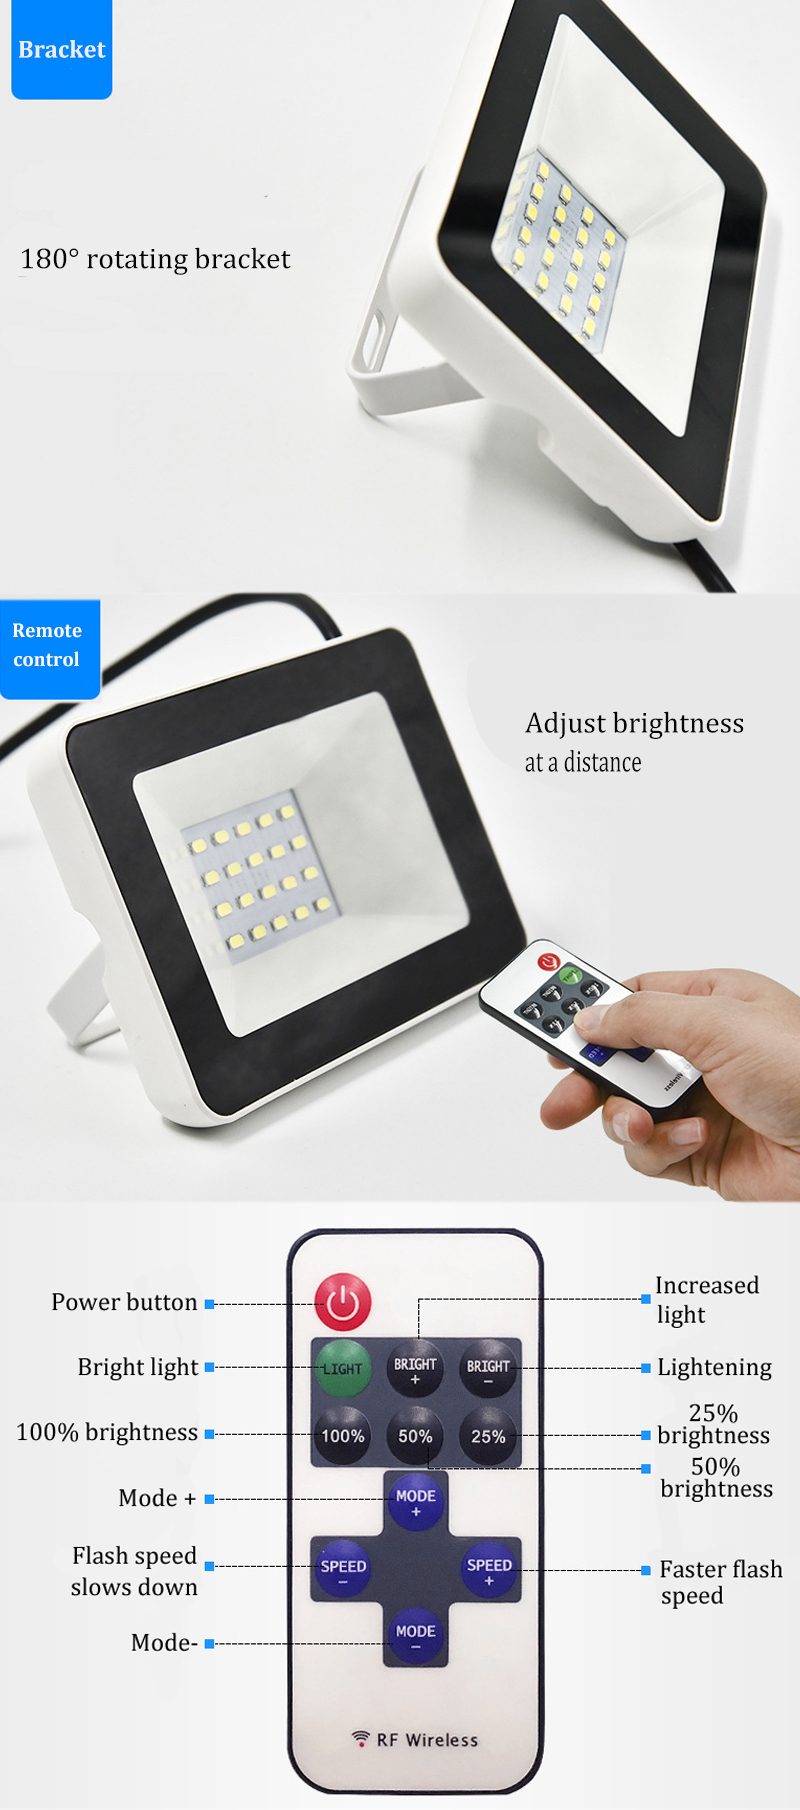 4W-20-LED-Solar-Powered-Light-Waterproof-Outdoor-Camping-Lamps-Emergency-Remote-Control-Lantern-1351438-2